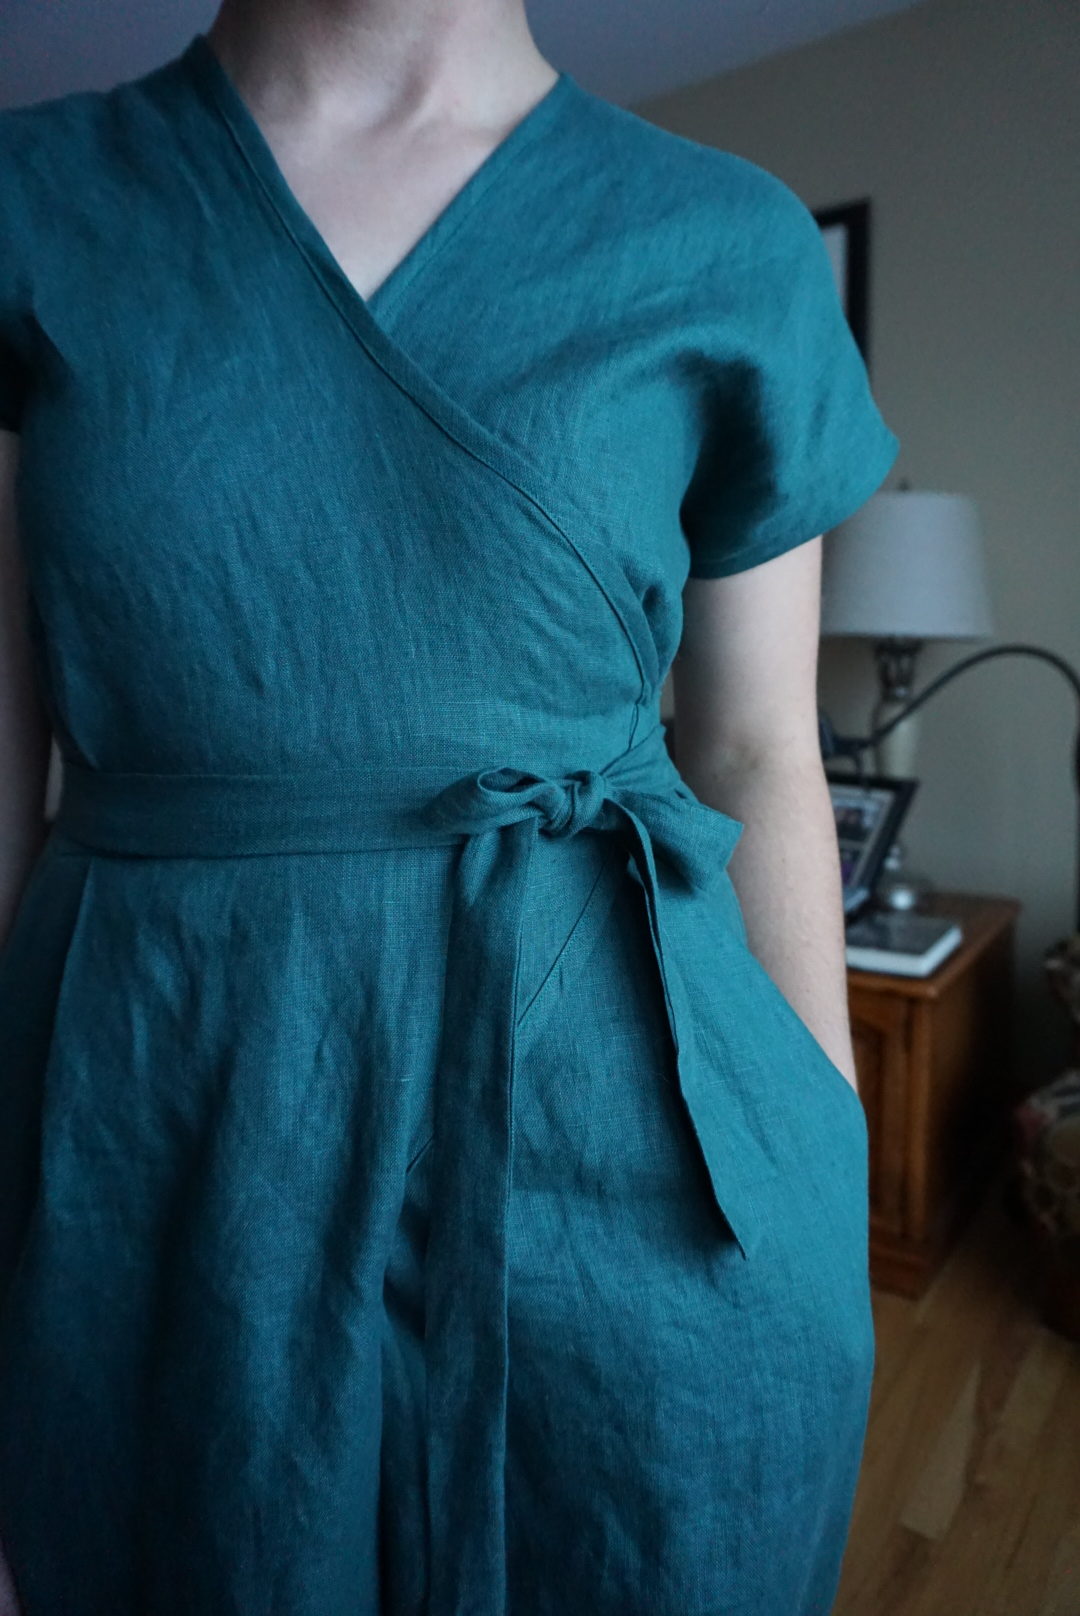 A close-up of the bodice of Megan's jumpsuit, showing the ties and the wrap overlap.